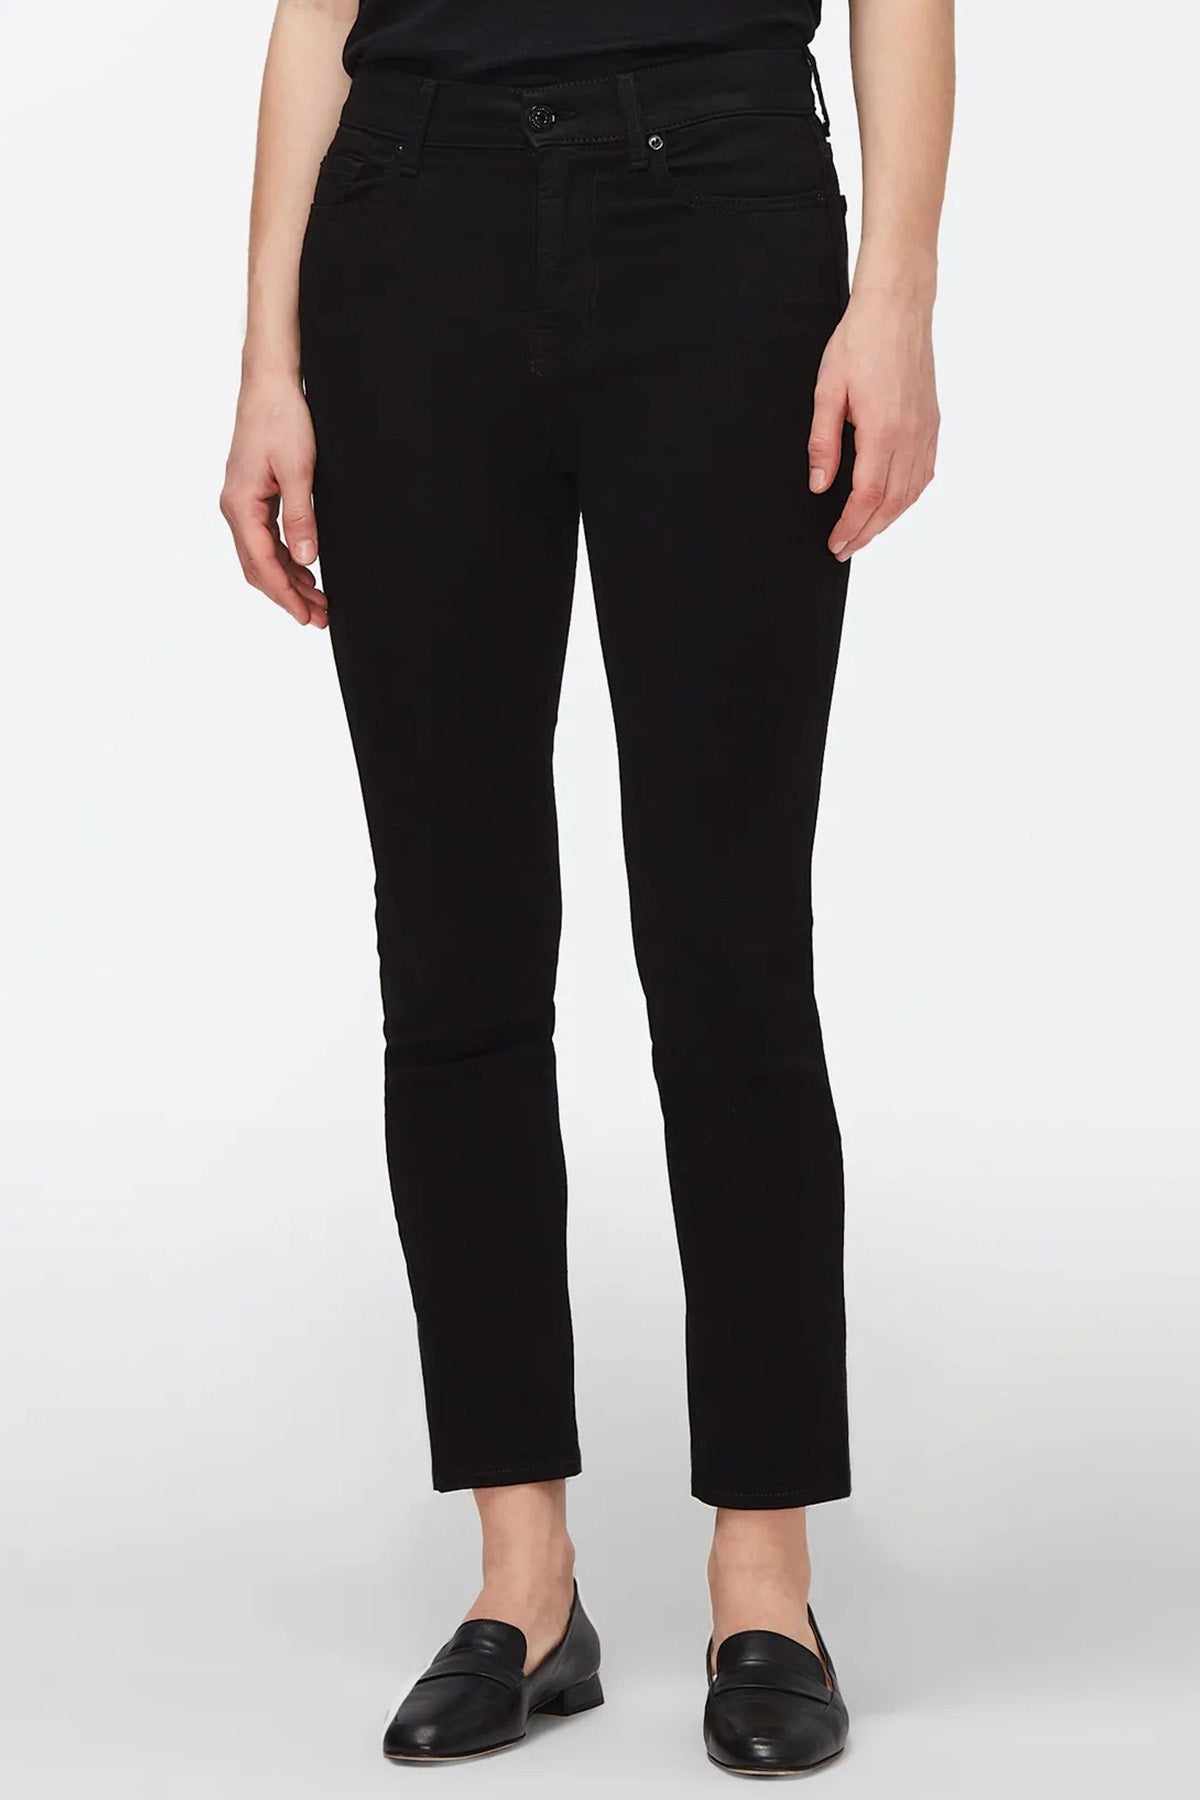 7 For All Mankind B Air Straight Fit Jeans-Libas Trendy Fashion Store